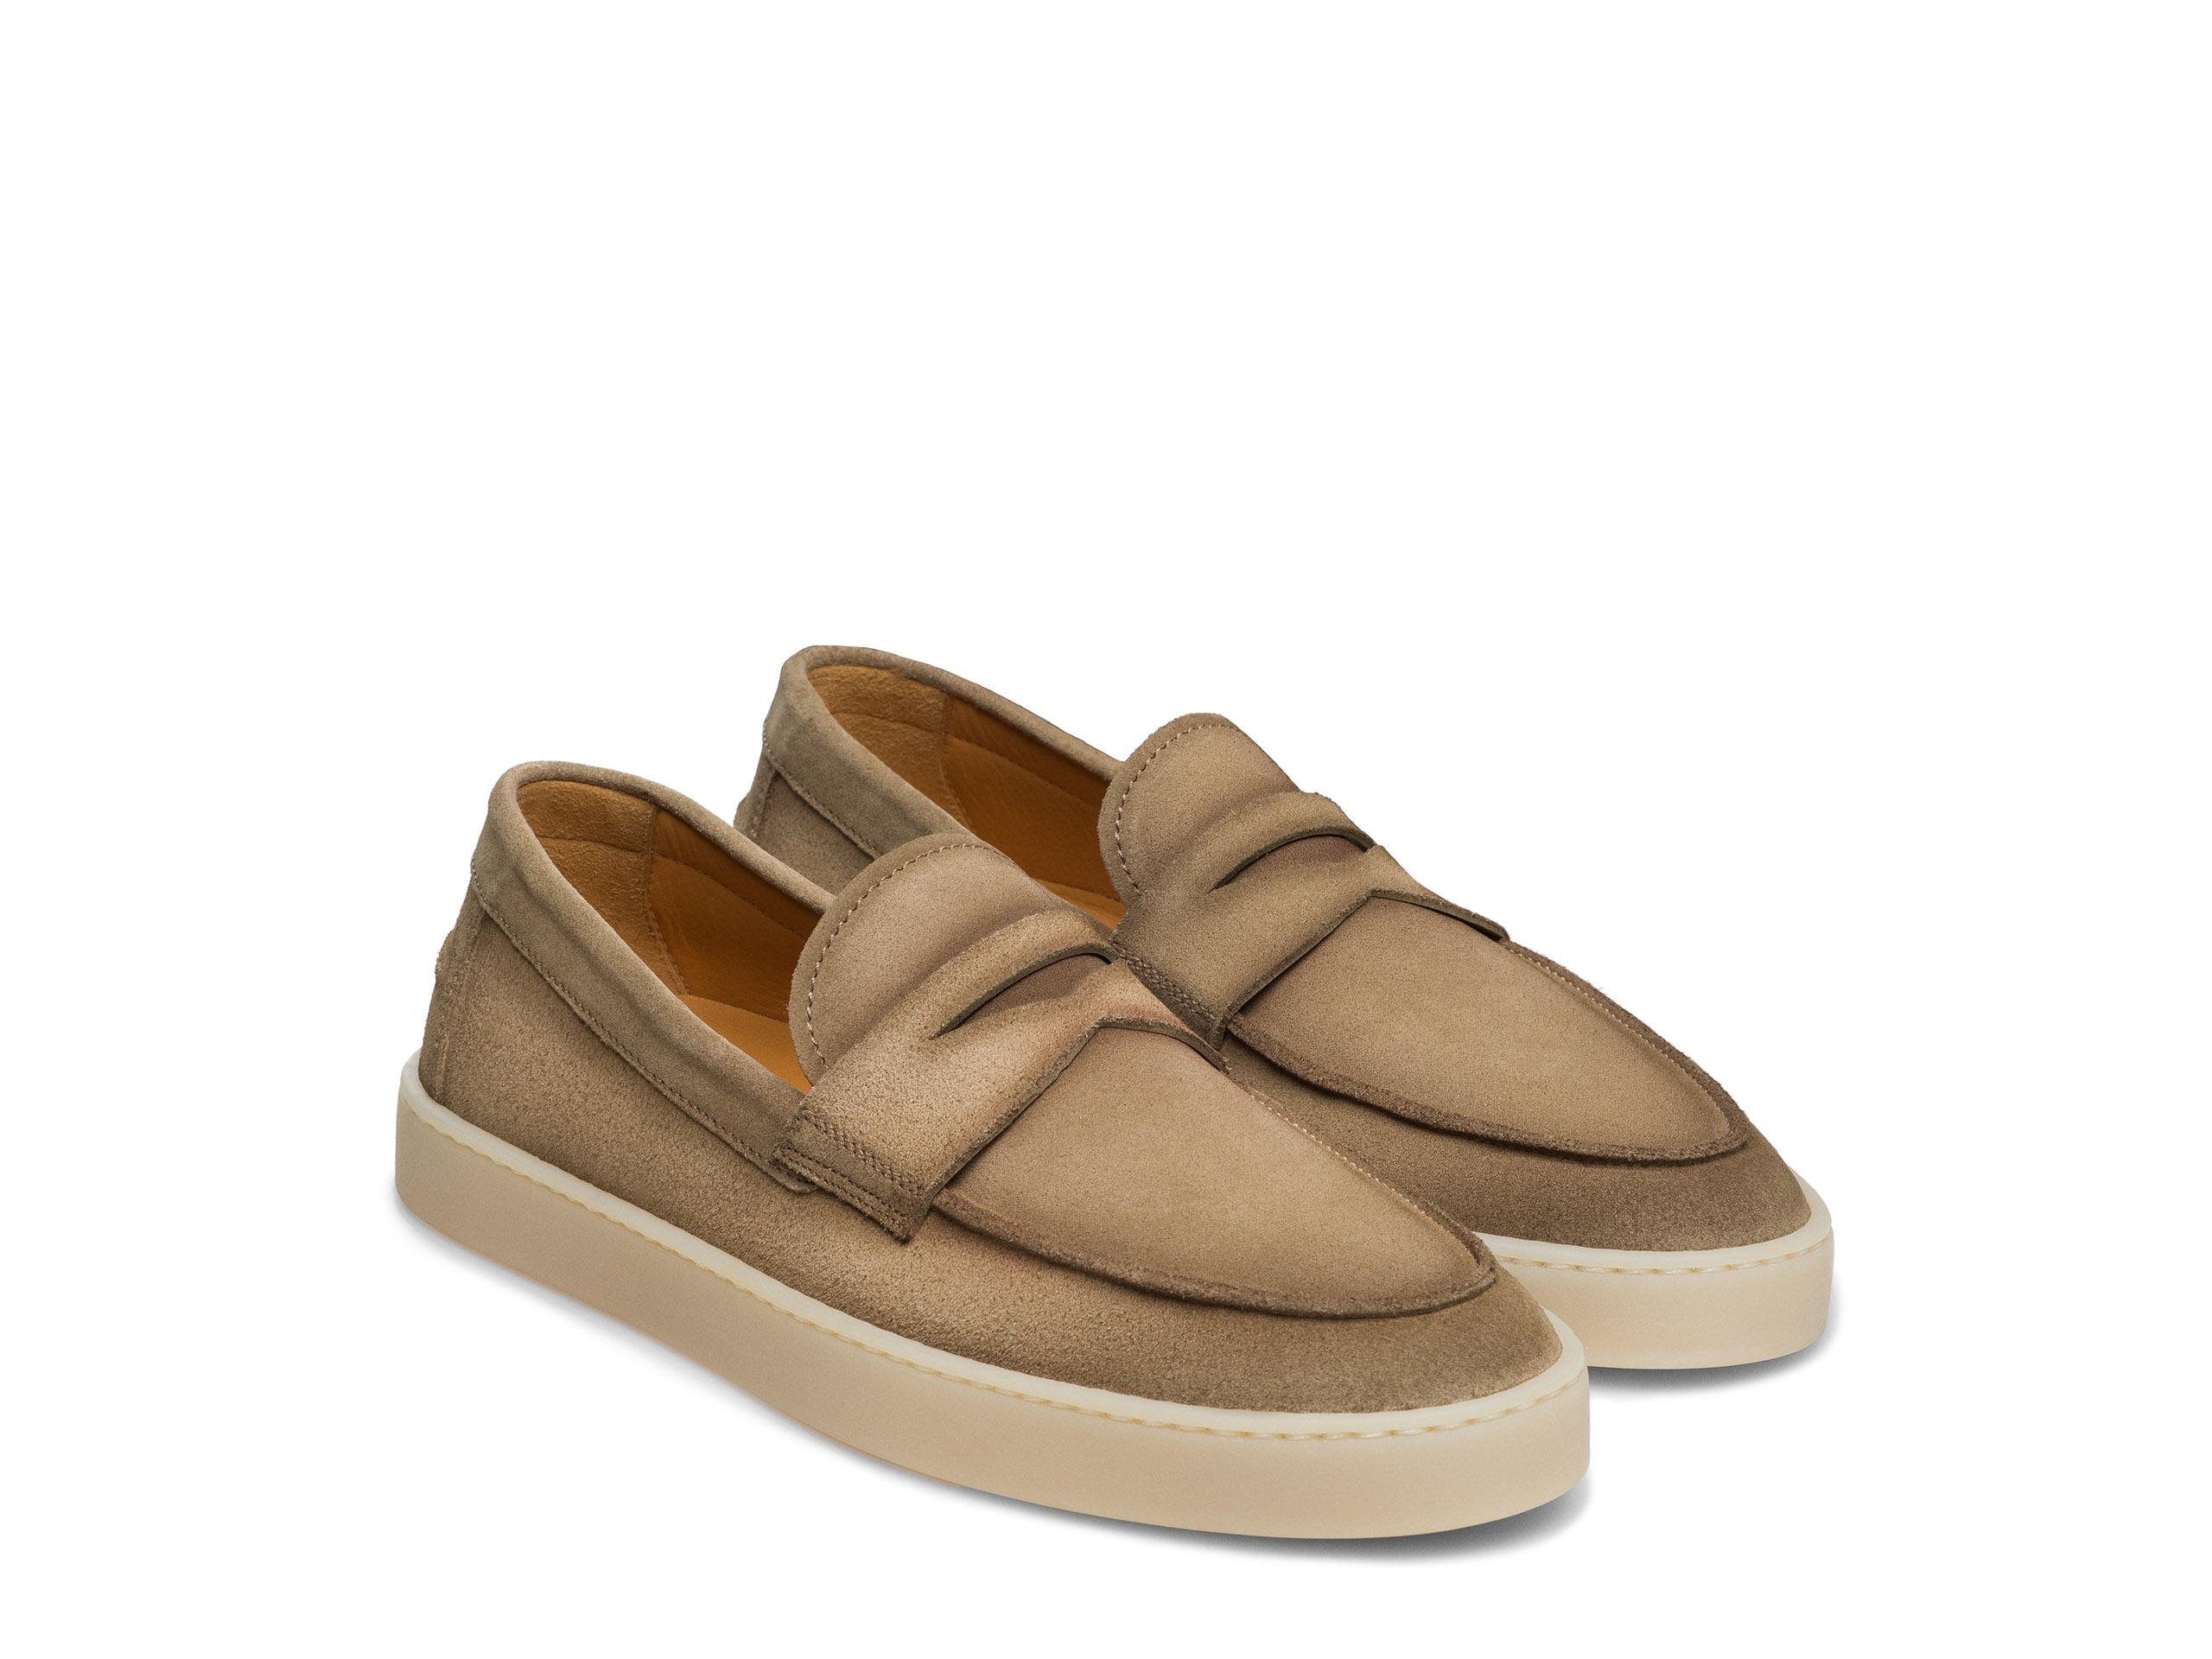 Pair of the Lawford FLX Taupe Suede